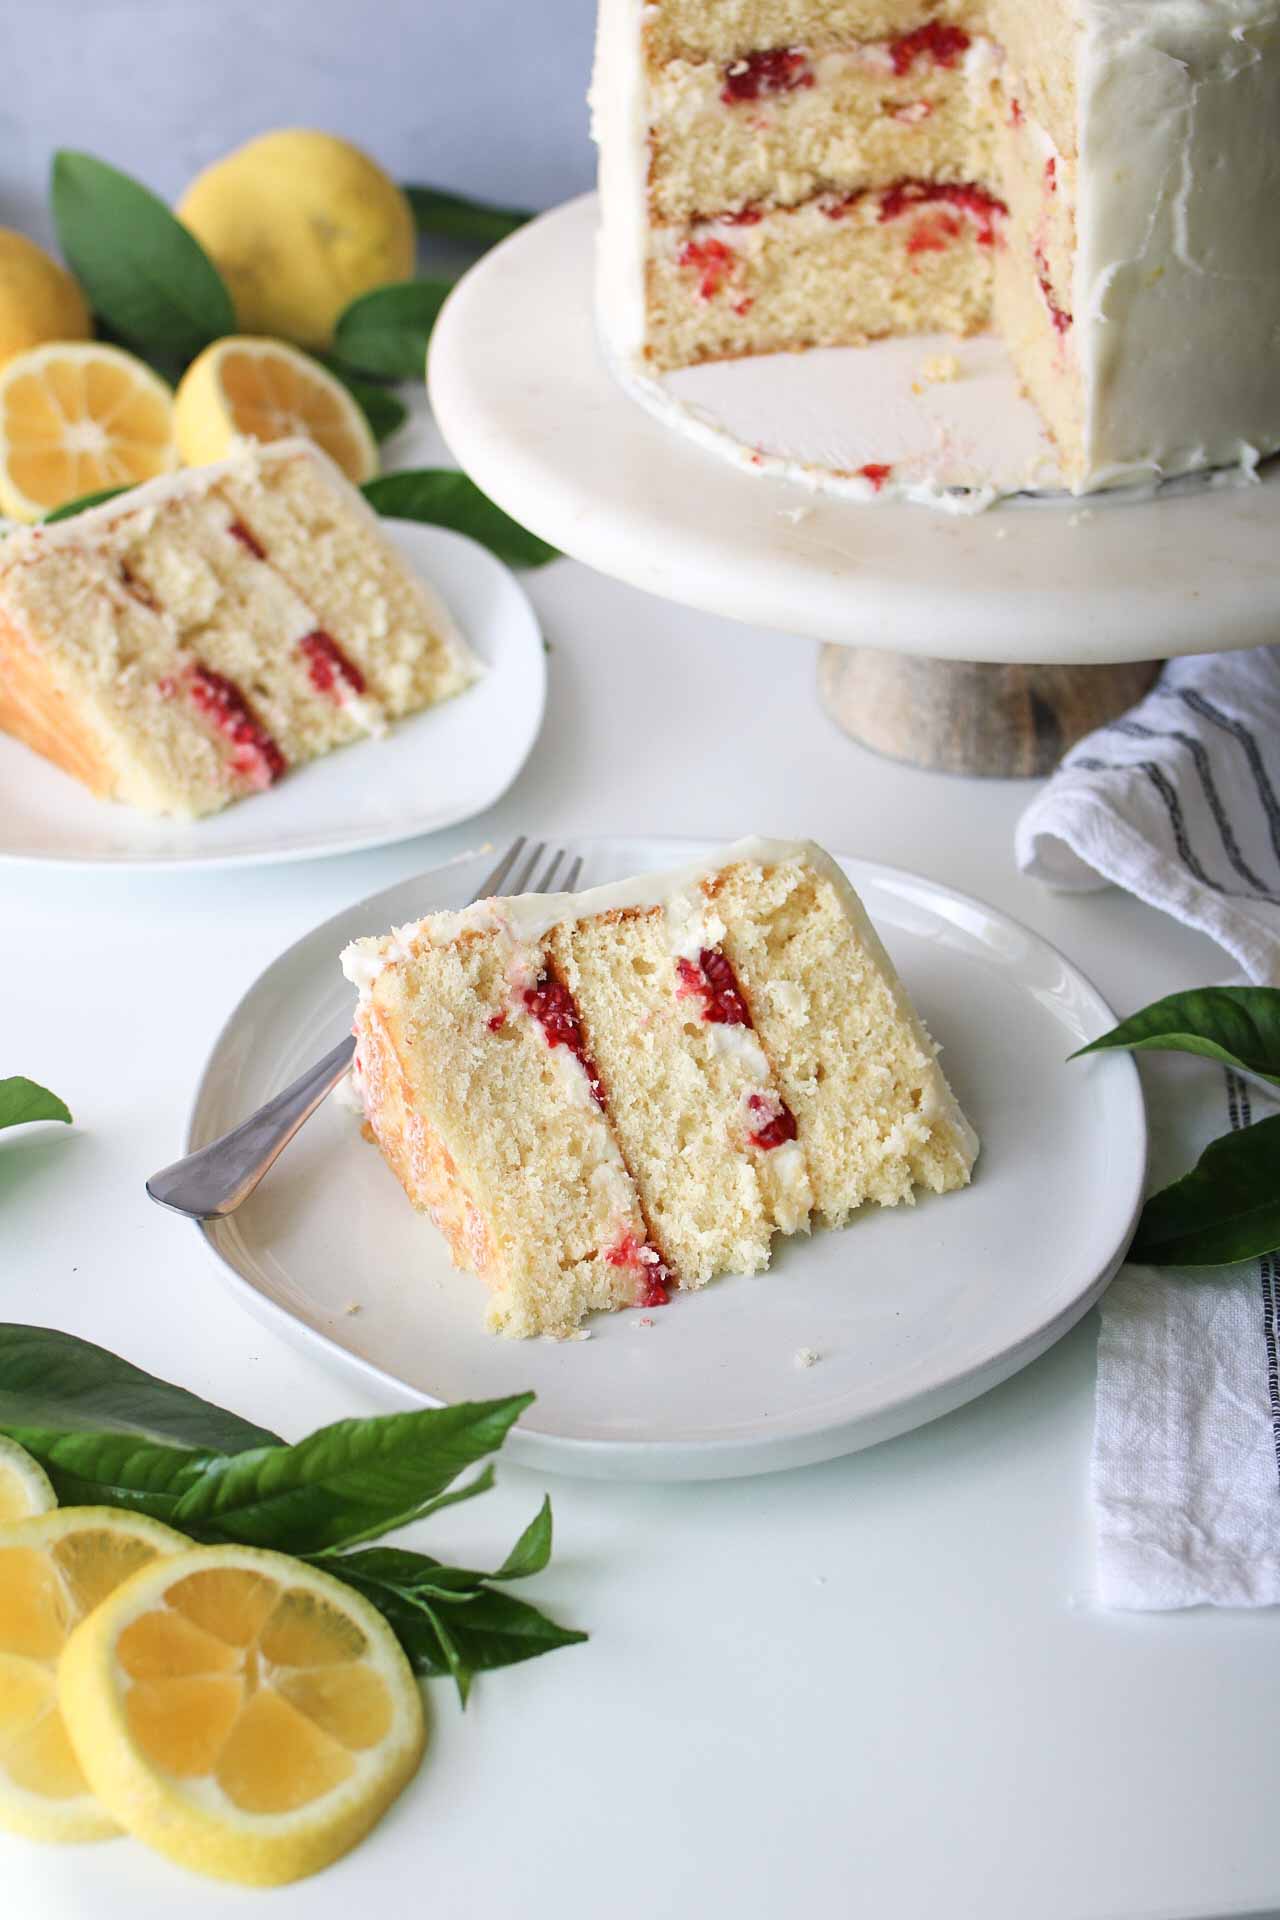 The Best Lemon Cake Ever! | The Organic Kitchen Blog and Tutorials